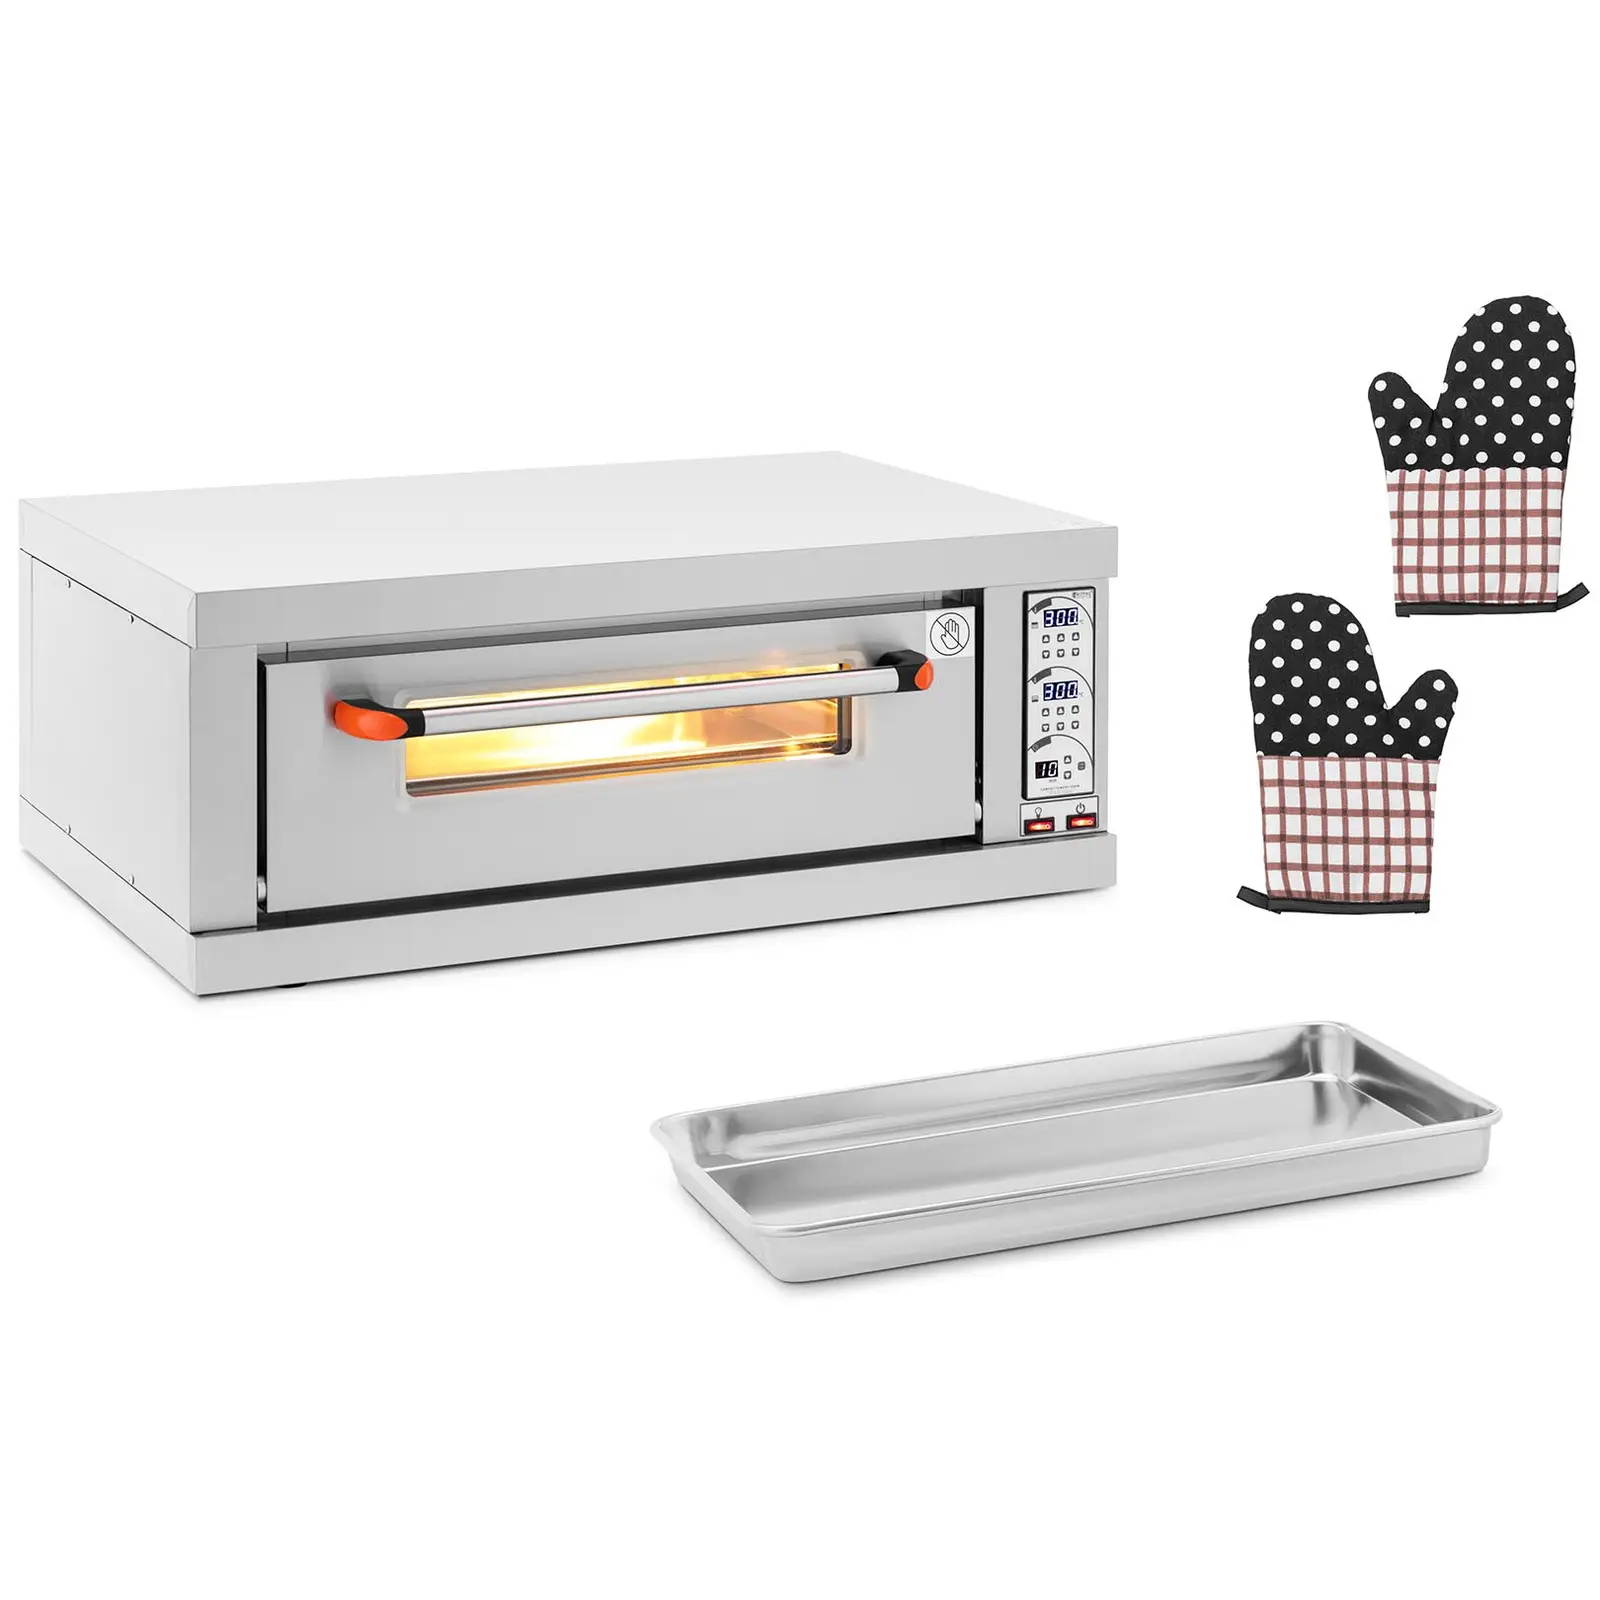 pizzaoven - 1 kamer - 3200 W - Timer - Royal Catering